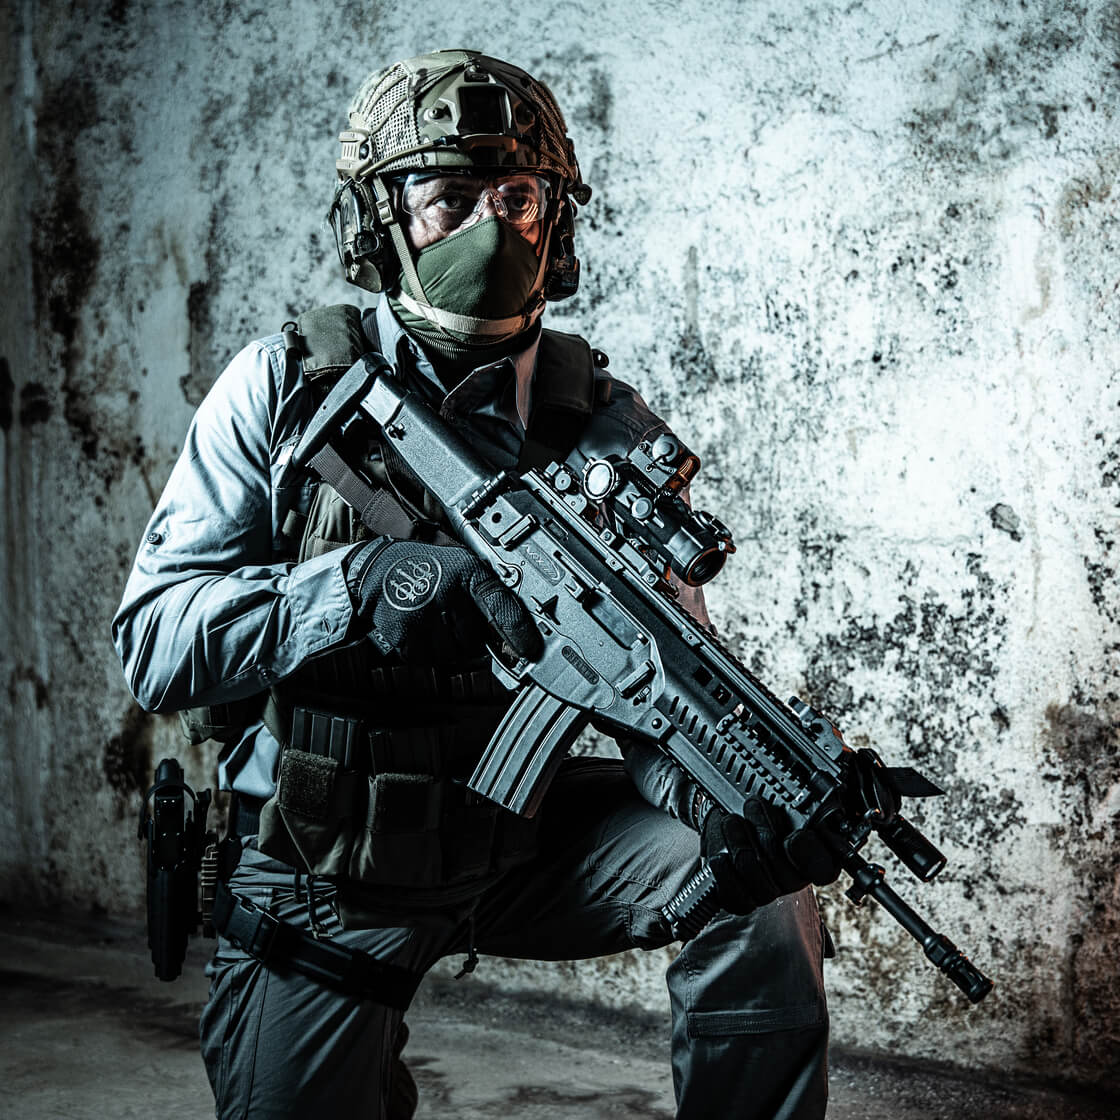 Company Pant 2.0: High-Performance Tactical Gear